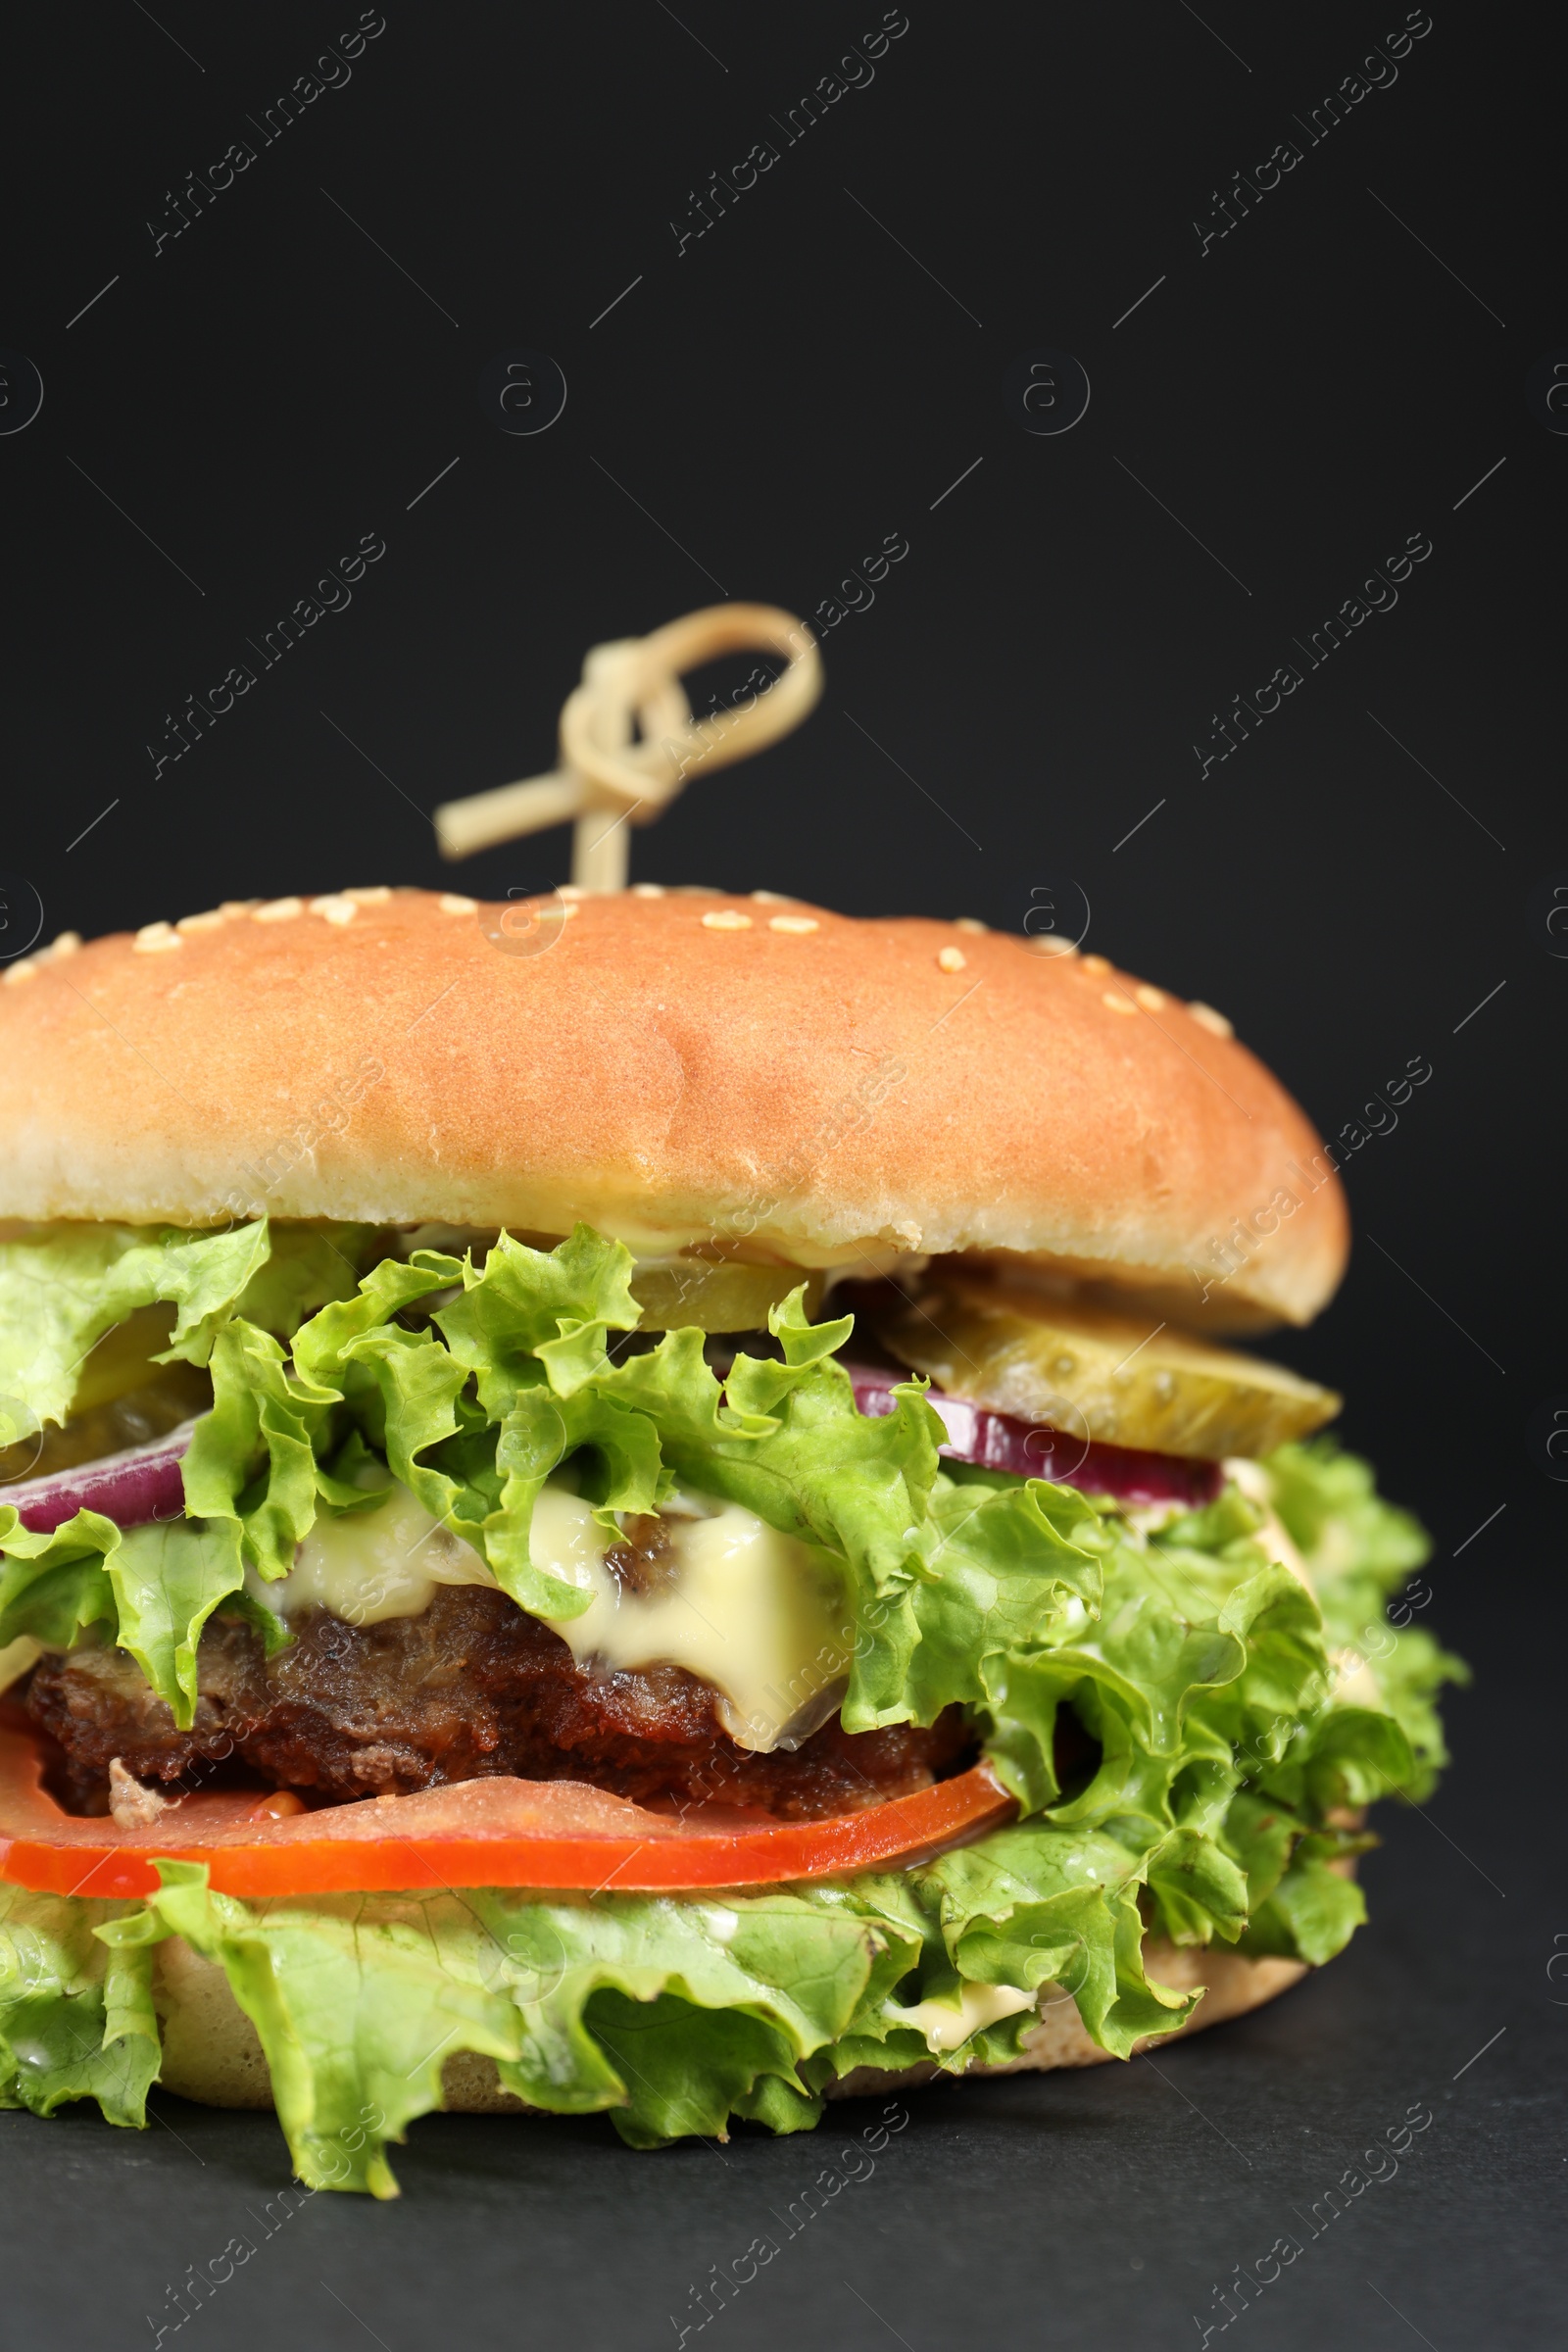 Photo of Delicious burger with beef patty and lettuce on black background